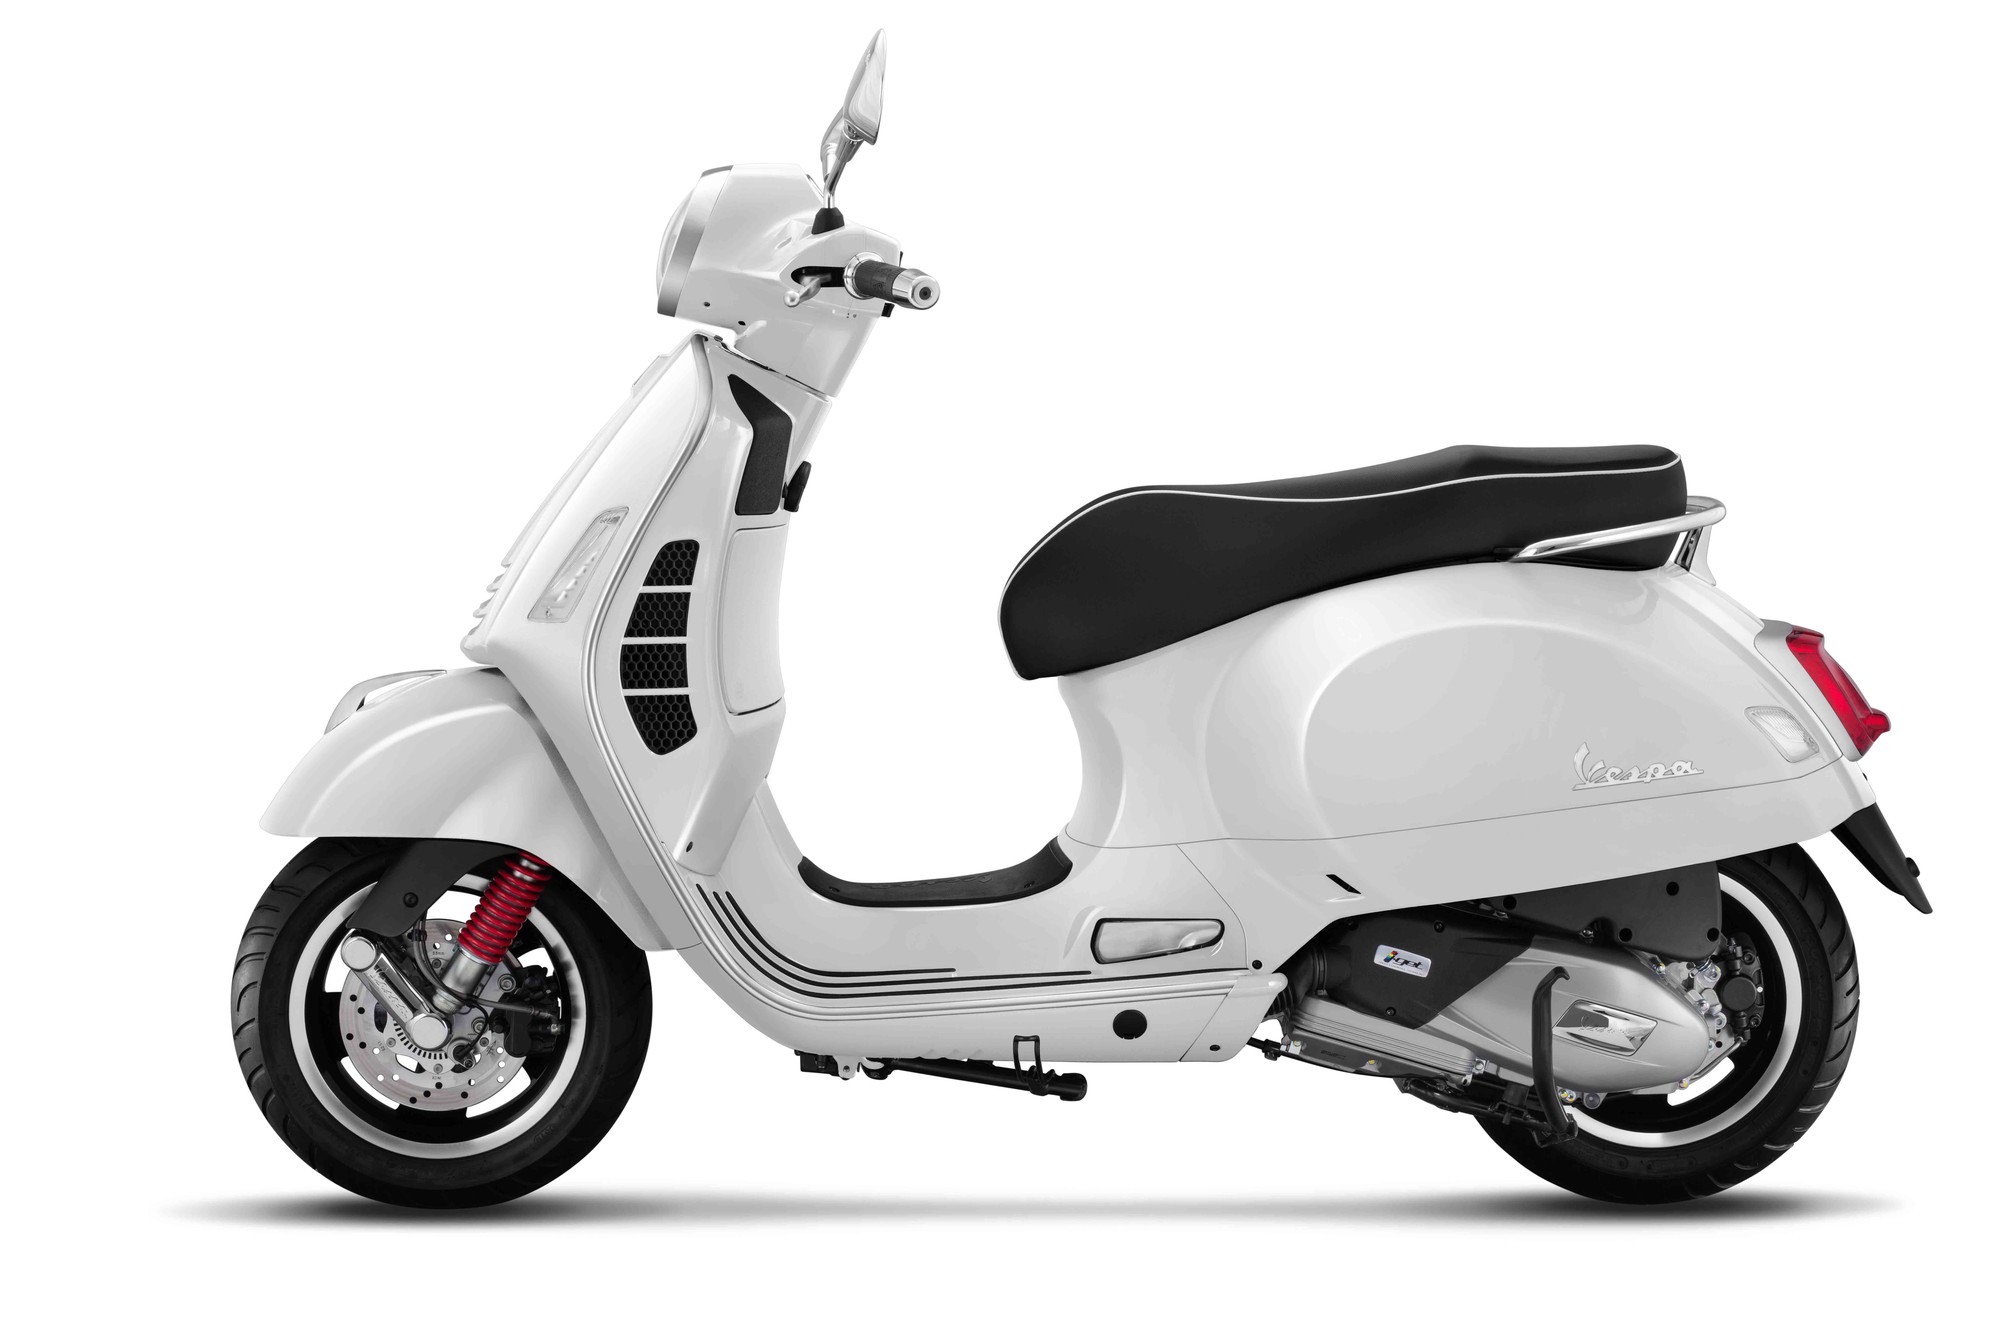 The posh commuter  Vespa GTS 150 Super 3v ie review  Motorcycle news  Motorcycle reviews from Malaysia Asia and the world  BikesRepubliccom